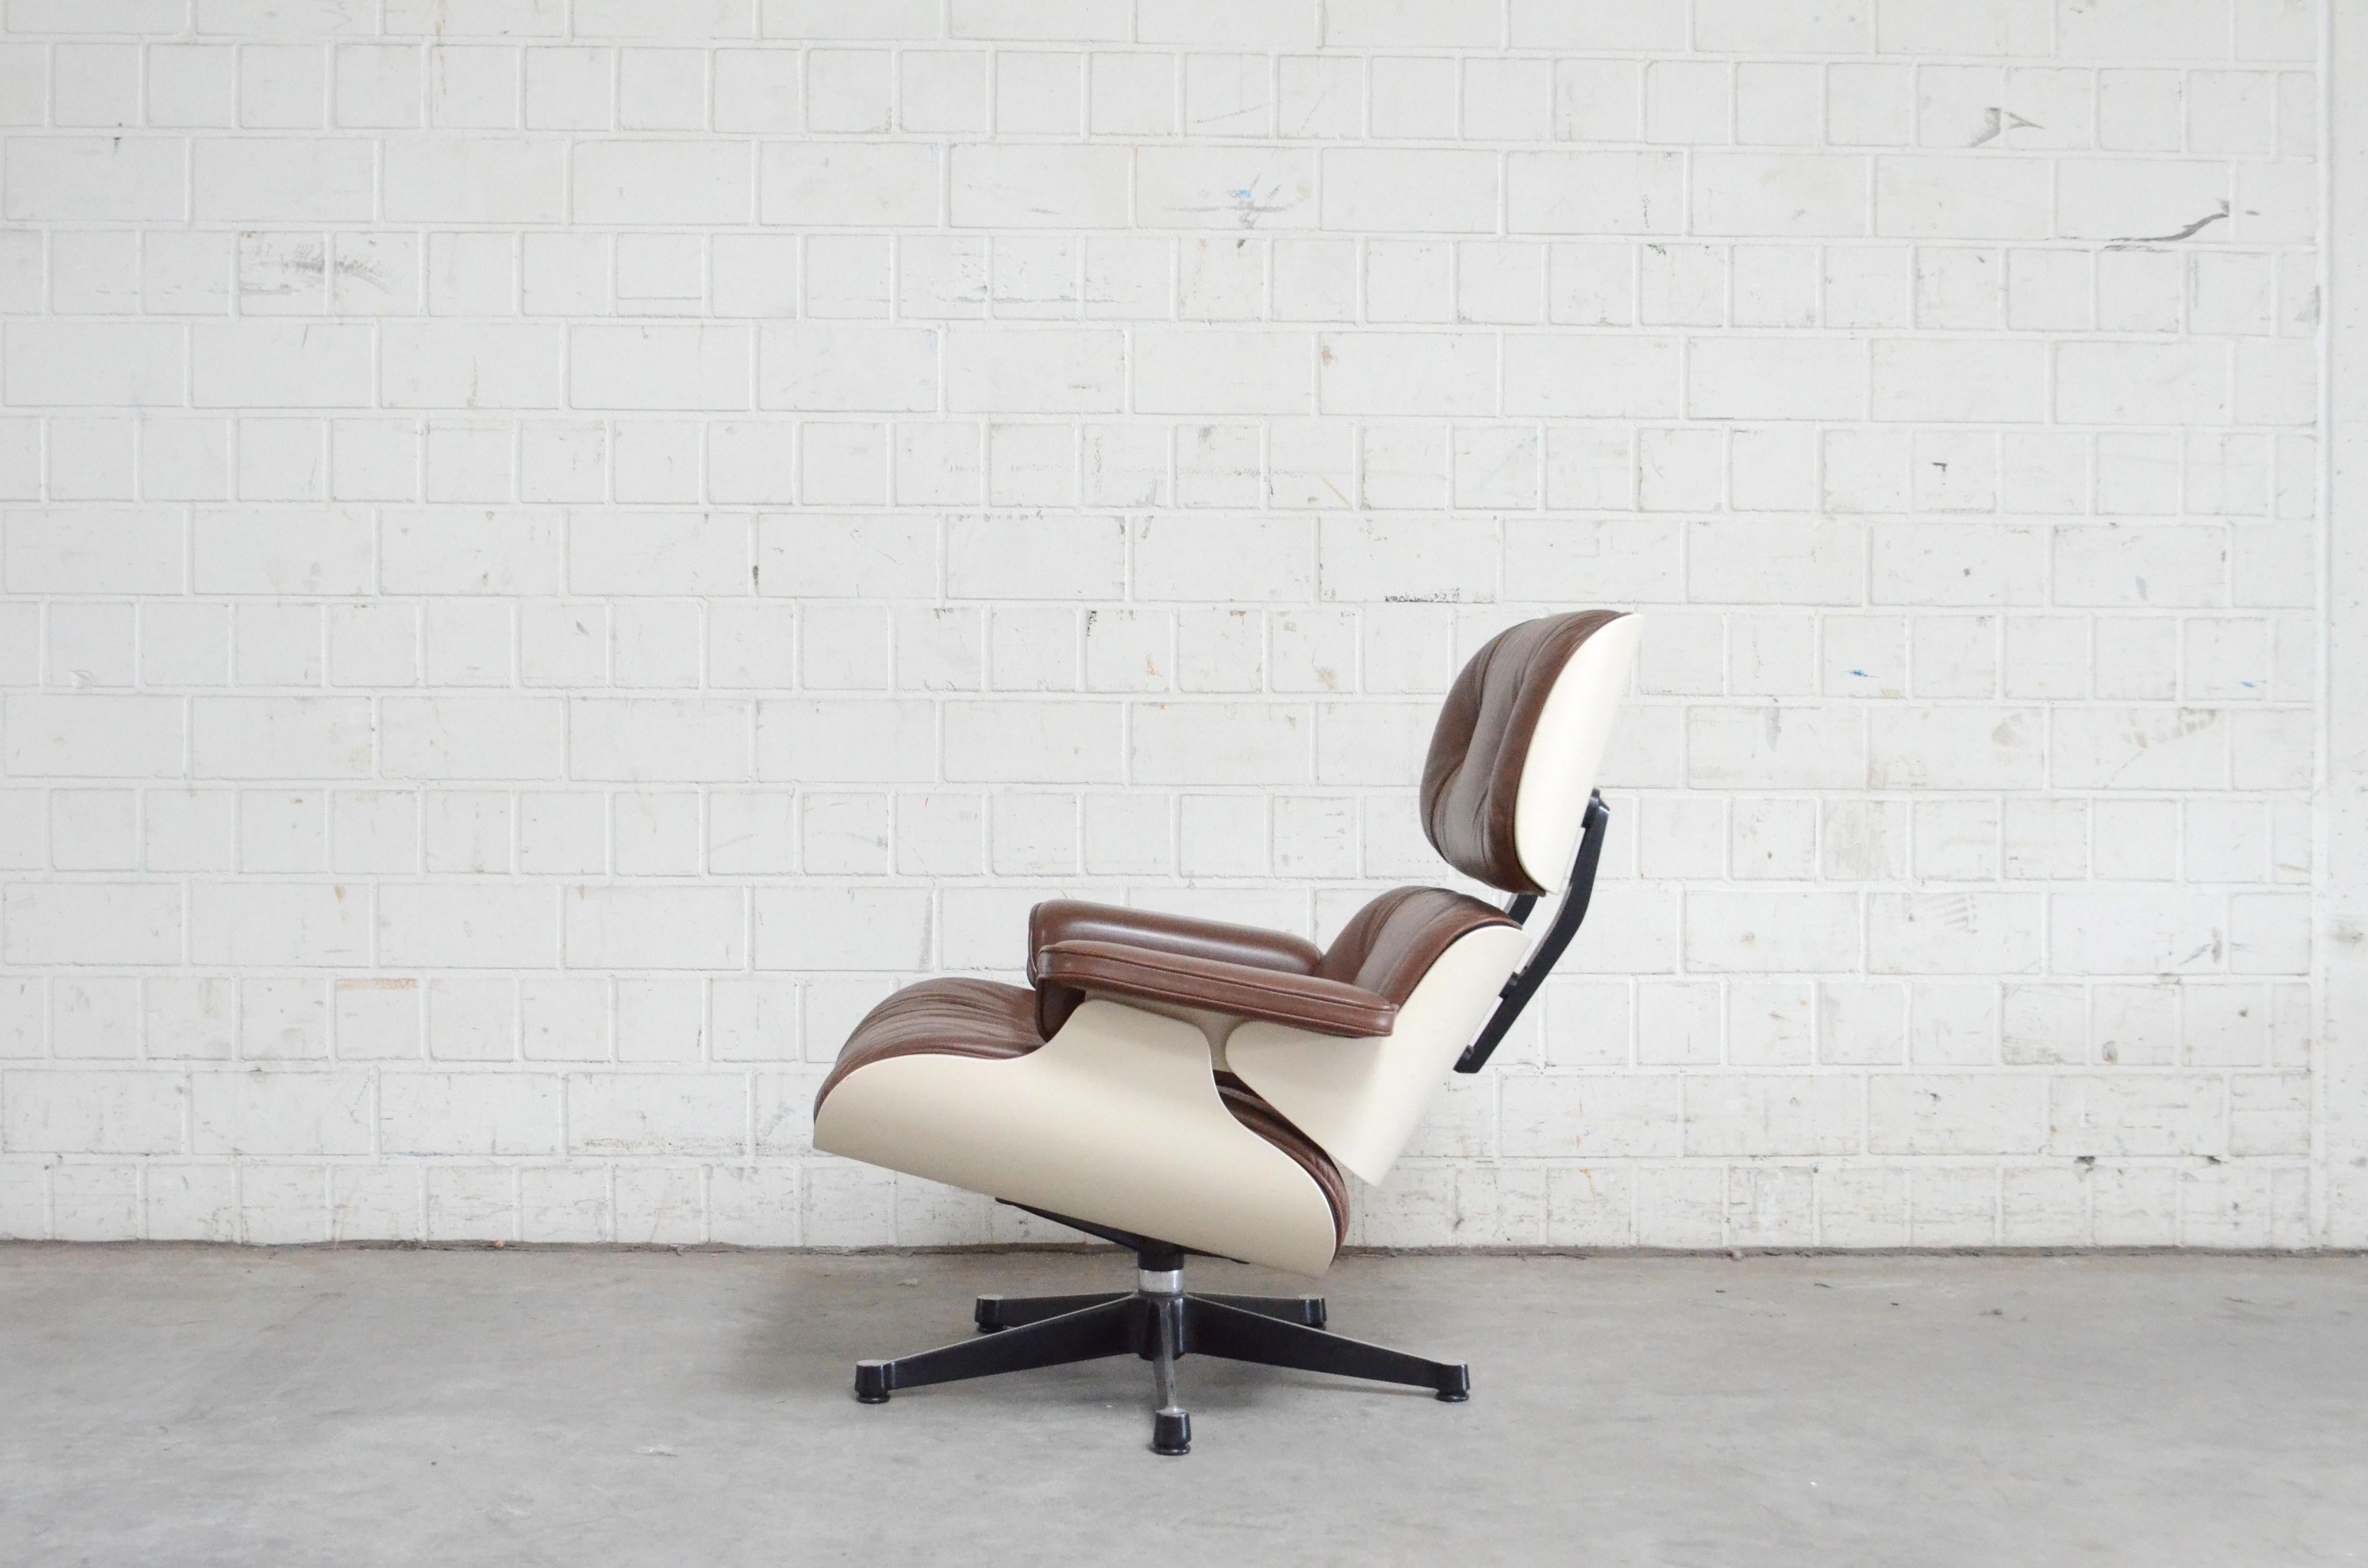 20th Century Vitra Eames Lounge Chair Cognac Brown and White Shell, Set of 2 For Sale